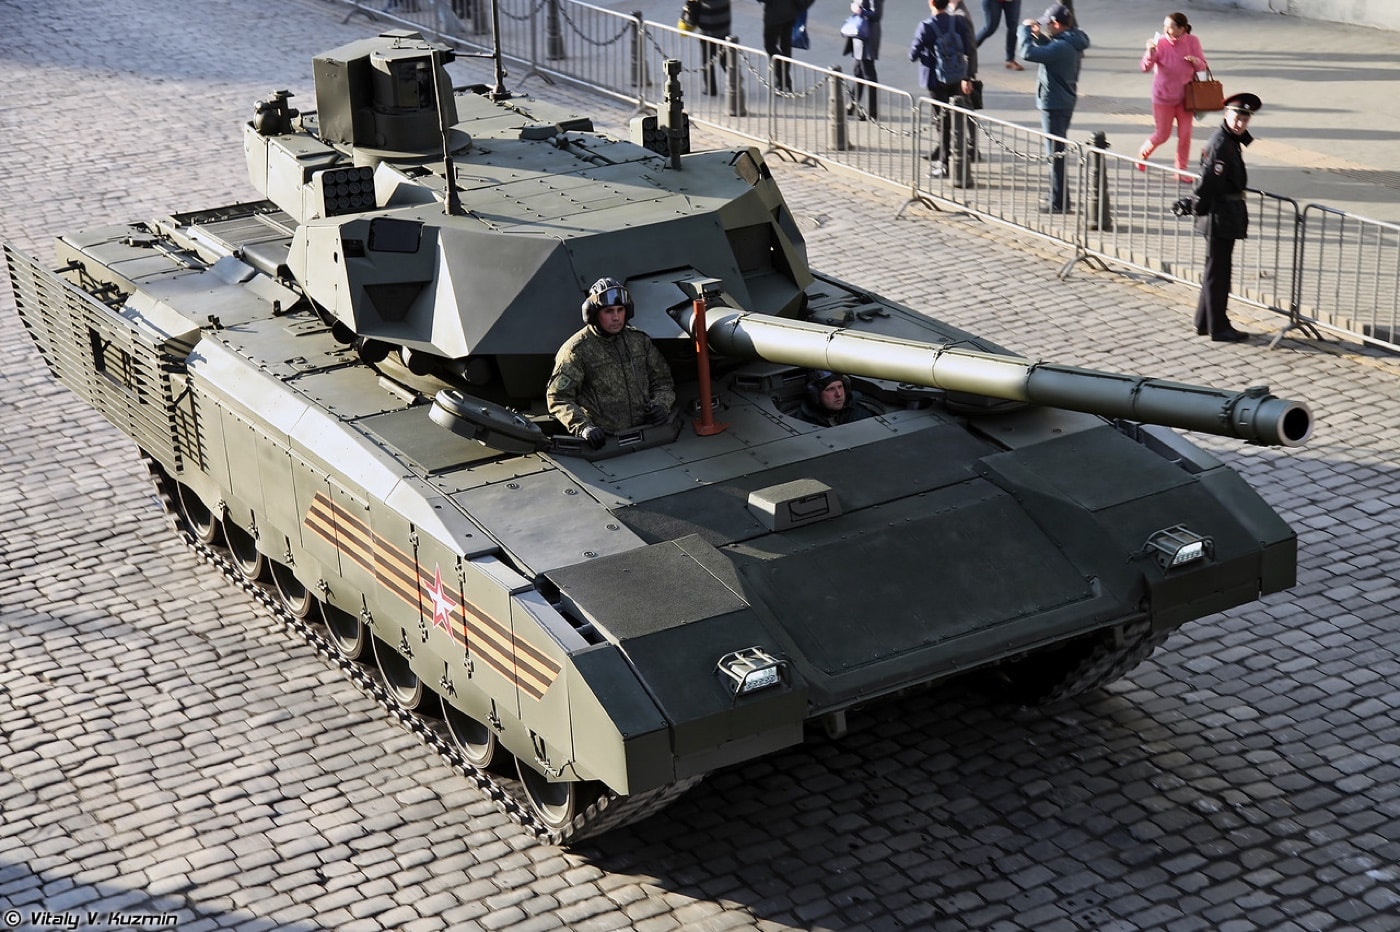 As seen in this photo, the T-14 Armata is a main battle tank designed for armored warfare. Part of its armament includes a main cannon that fires armor piercing ammunition in the form of a armour-piercing discarding sabot. Armour-piercing discarding sabot is a type of spin-stabilized kinetic energy projectile for anti-armour warfare. Each projectile consists of a sub-calibre round fitted with a sabot.